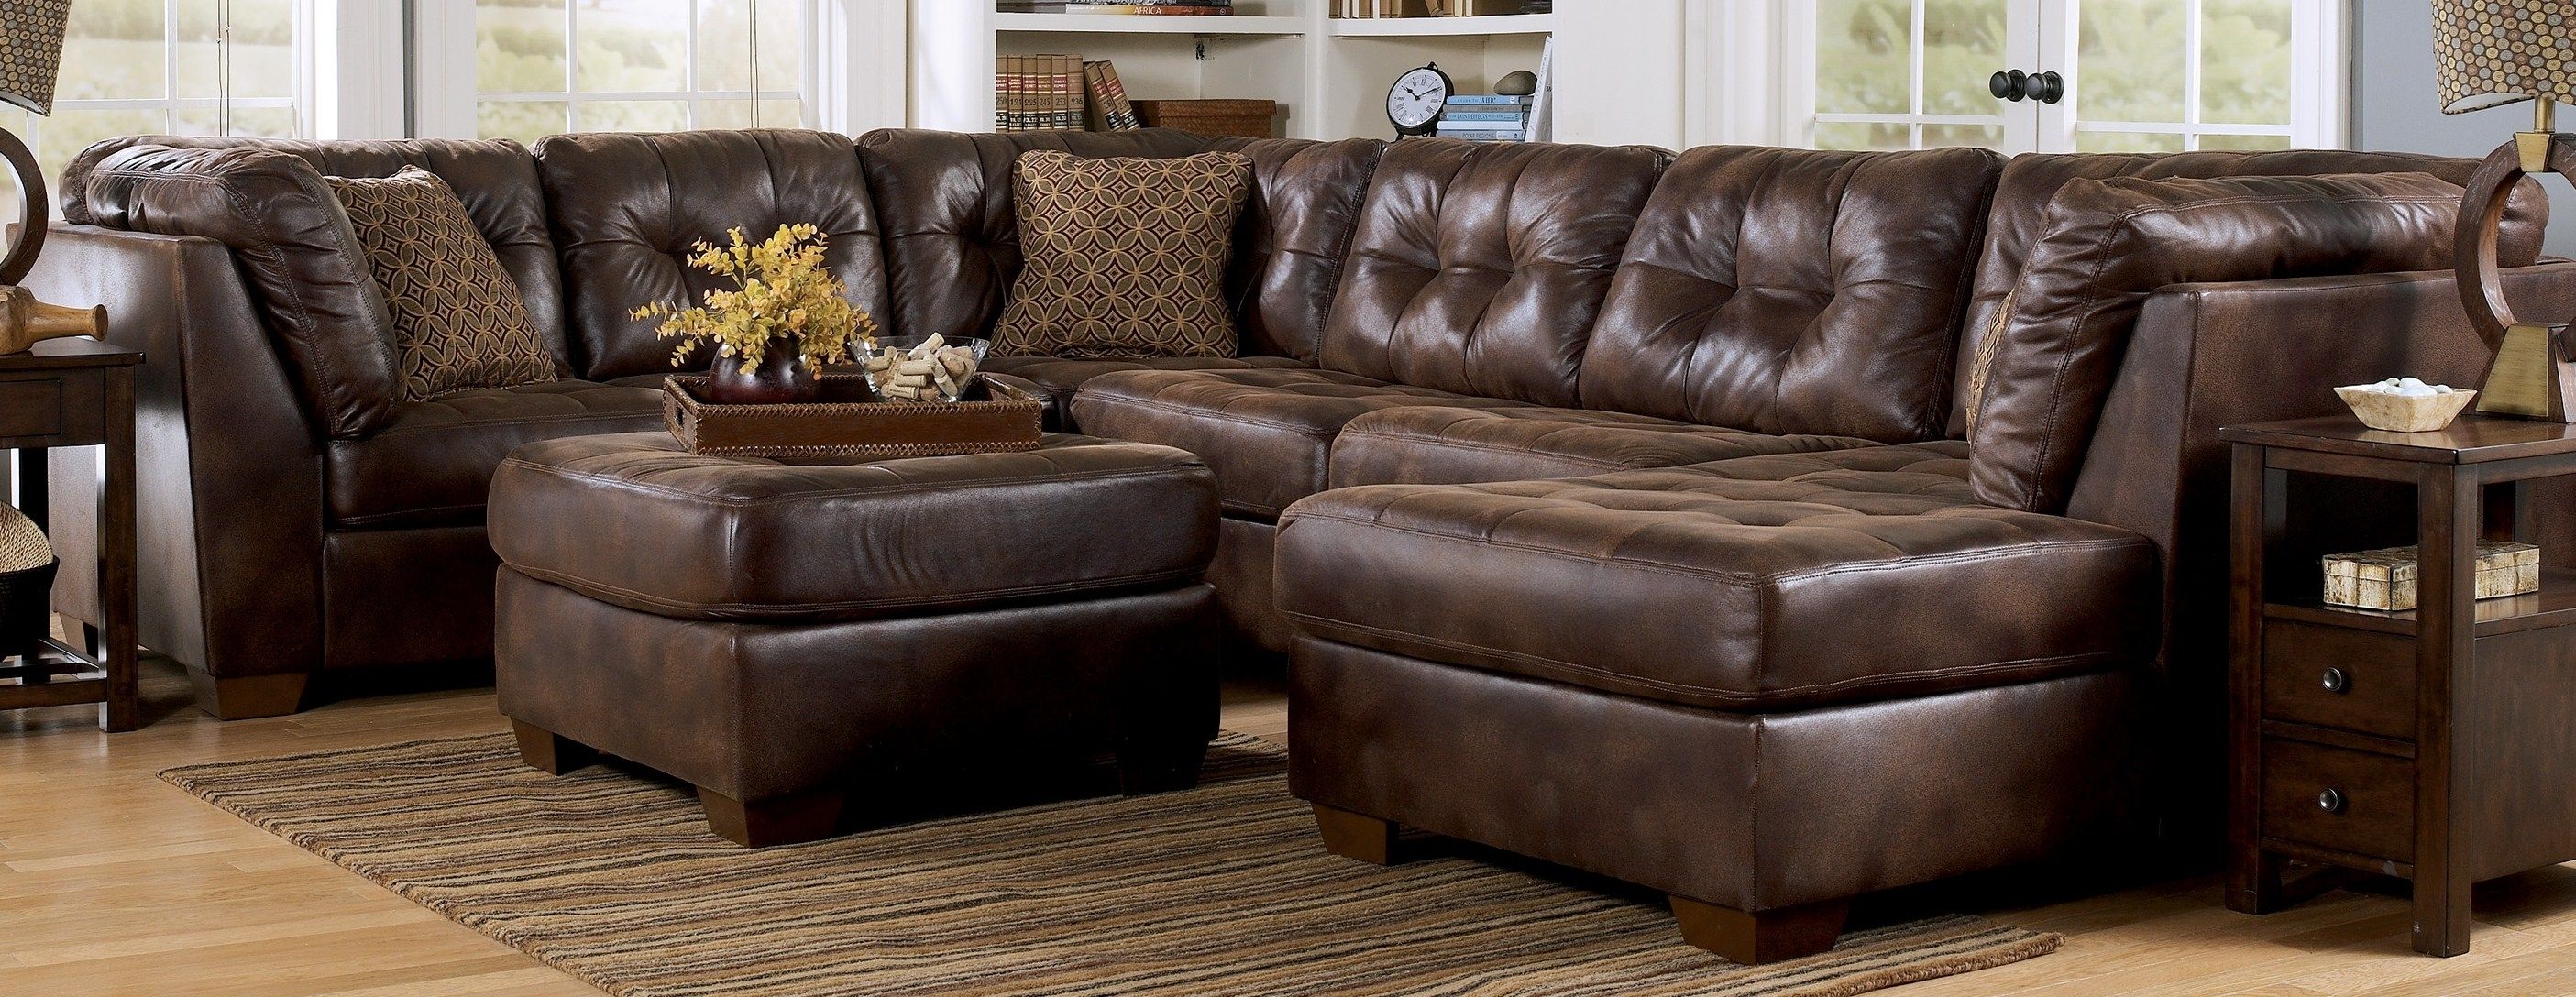 Frontier – Canyon The New Sectional Couch Im Saving For (View 12 of 15)